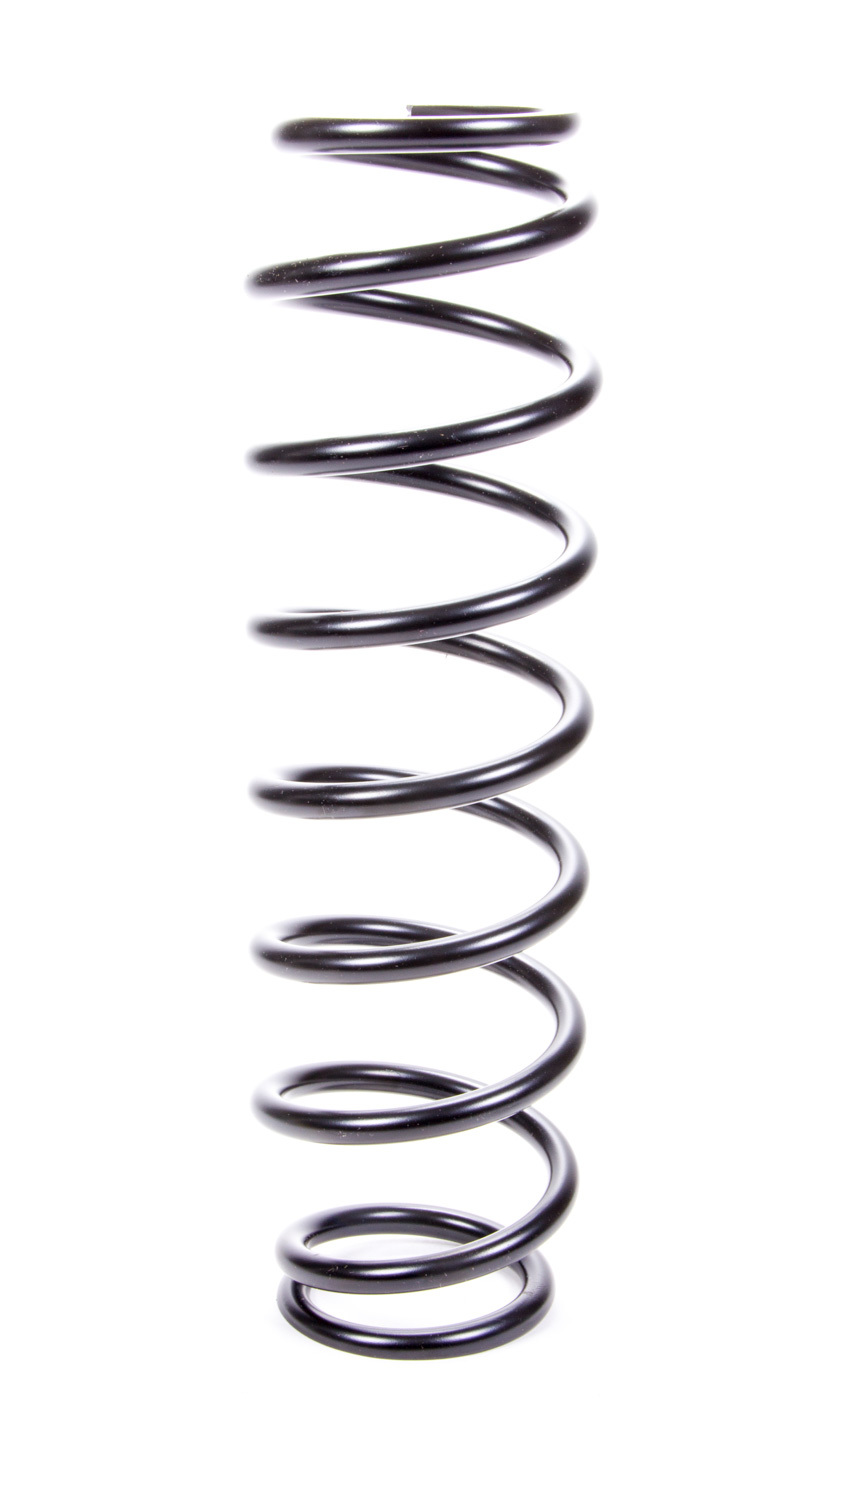 Swift Springs 140-250-225B Coil Spring, Barrel, Coil-Over, 2.500 in ID, 14.000 in Length, 225 lb/in Spring Rate, Steel, Black Powder Coat, Each